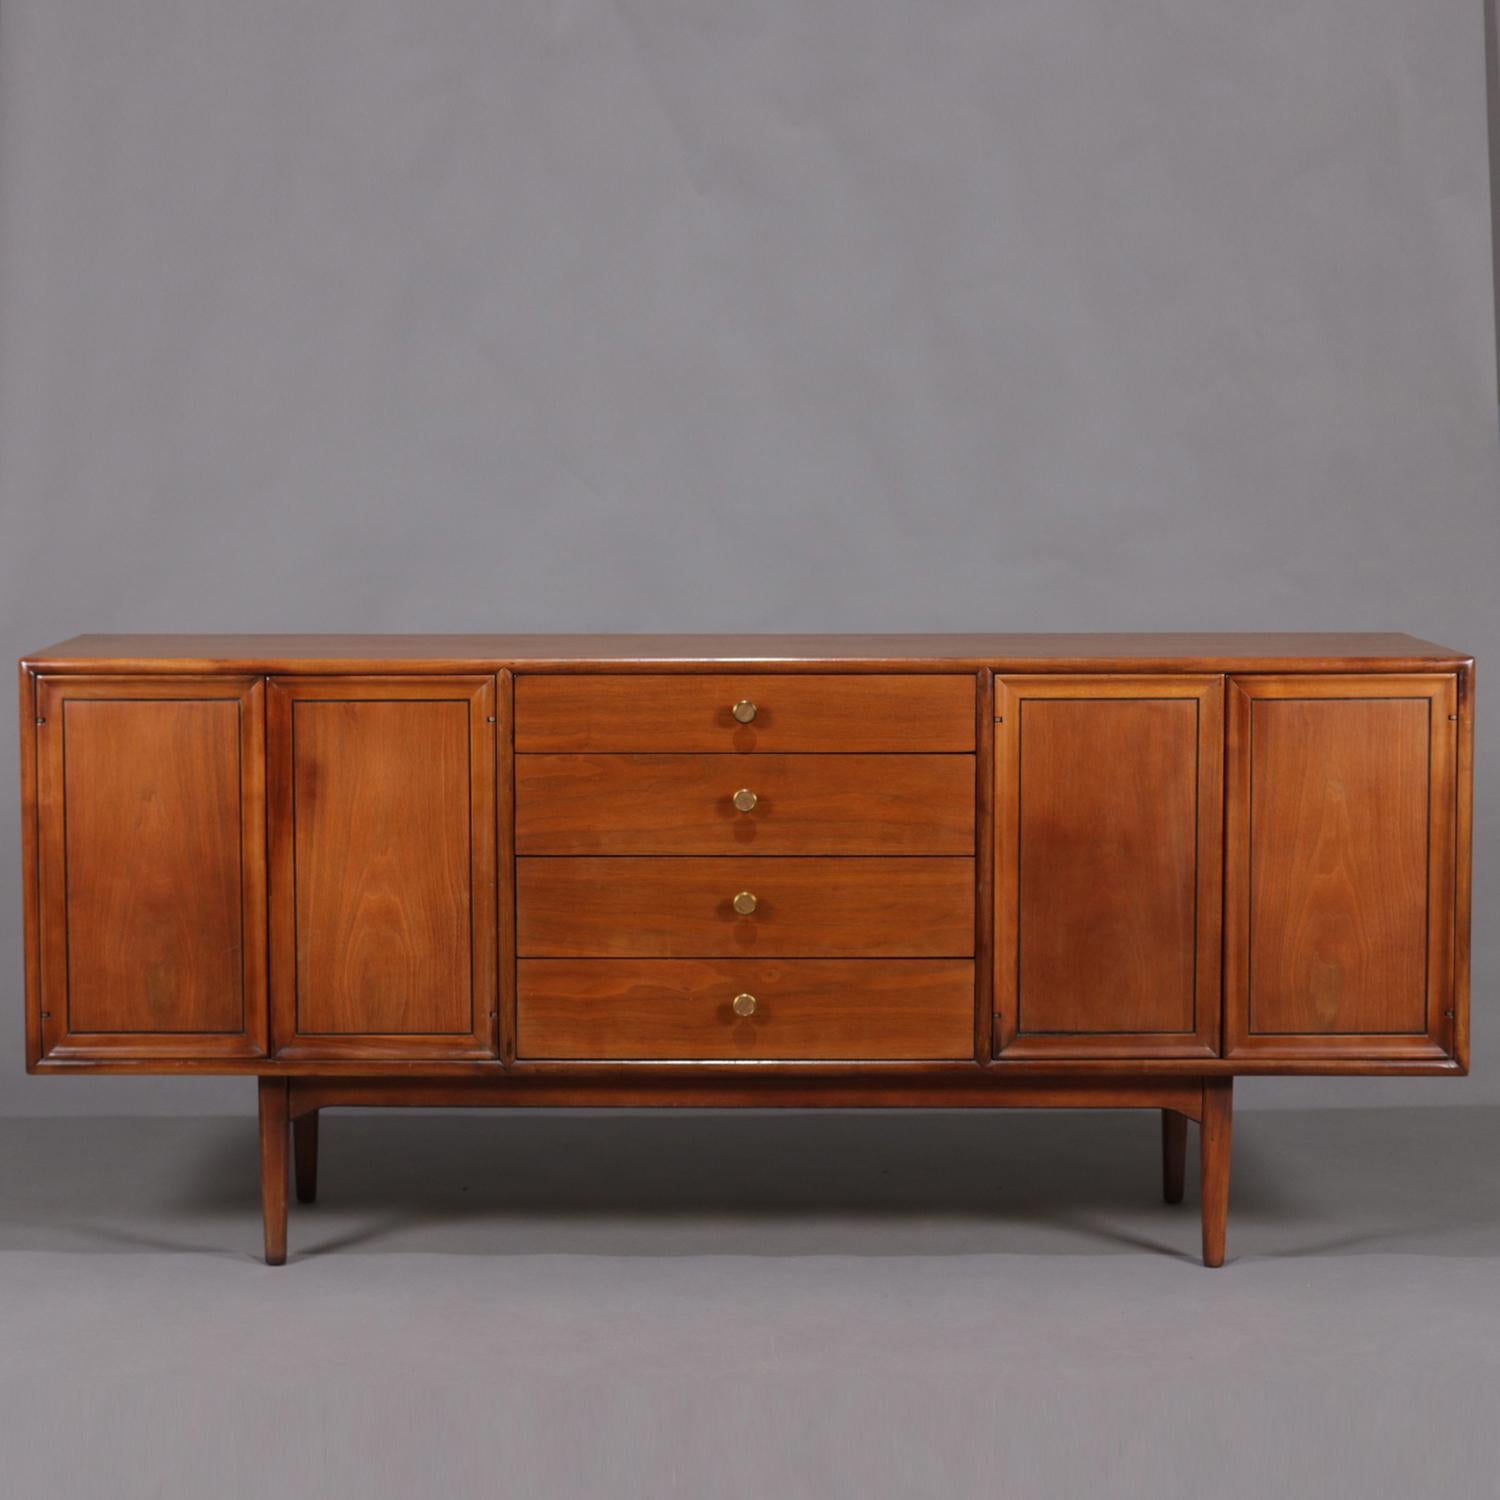 Midcentury Danish modern declaration credenza by Drexel features designing by by Kipp Stewart and Stewart McDougall and includes walnut construction having four stacked central drawers flanked by cabinets each having adjustable shelving, one with